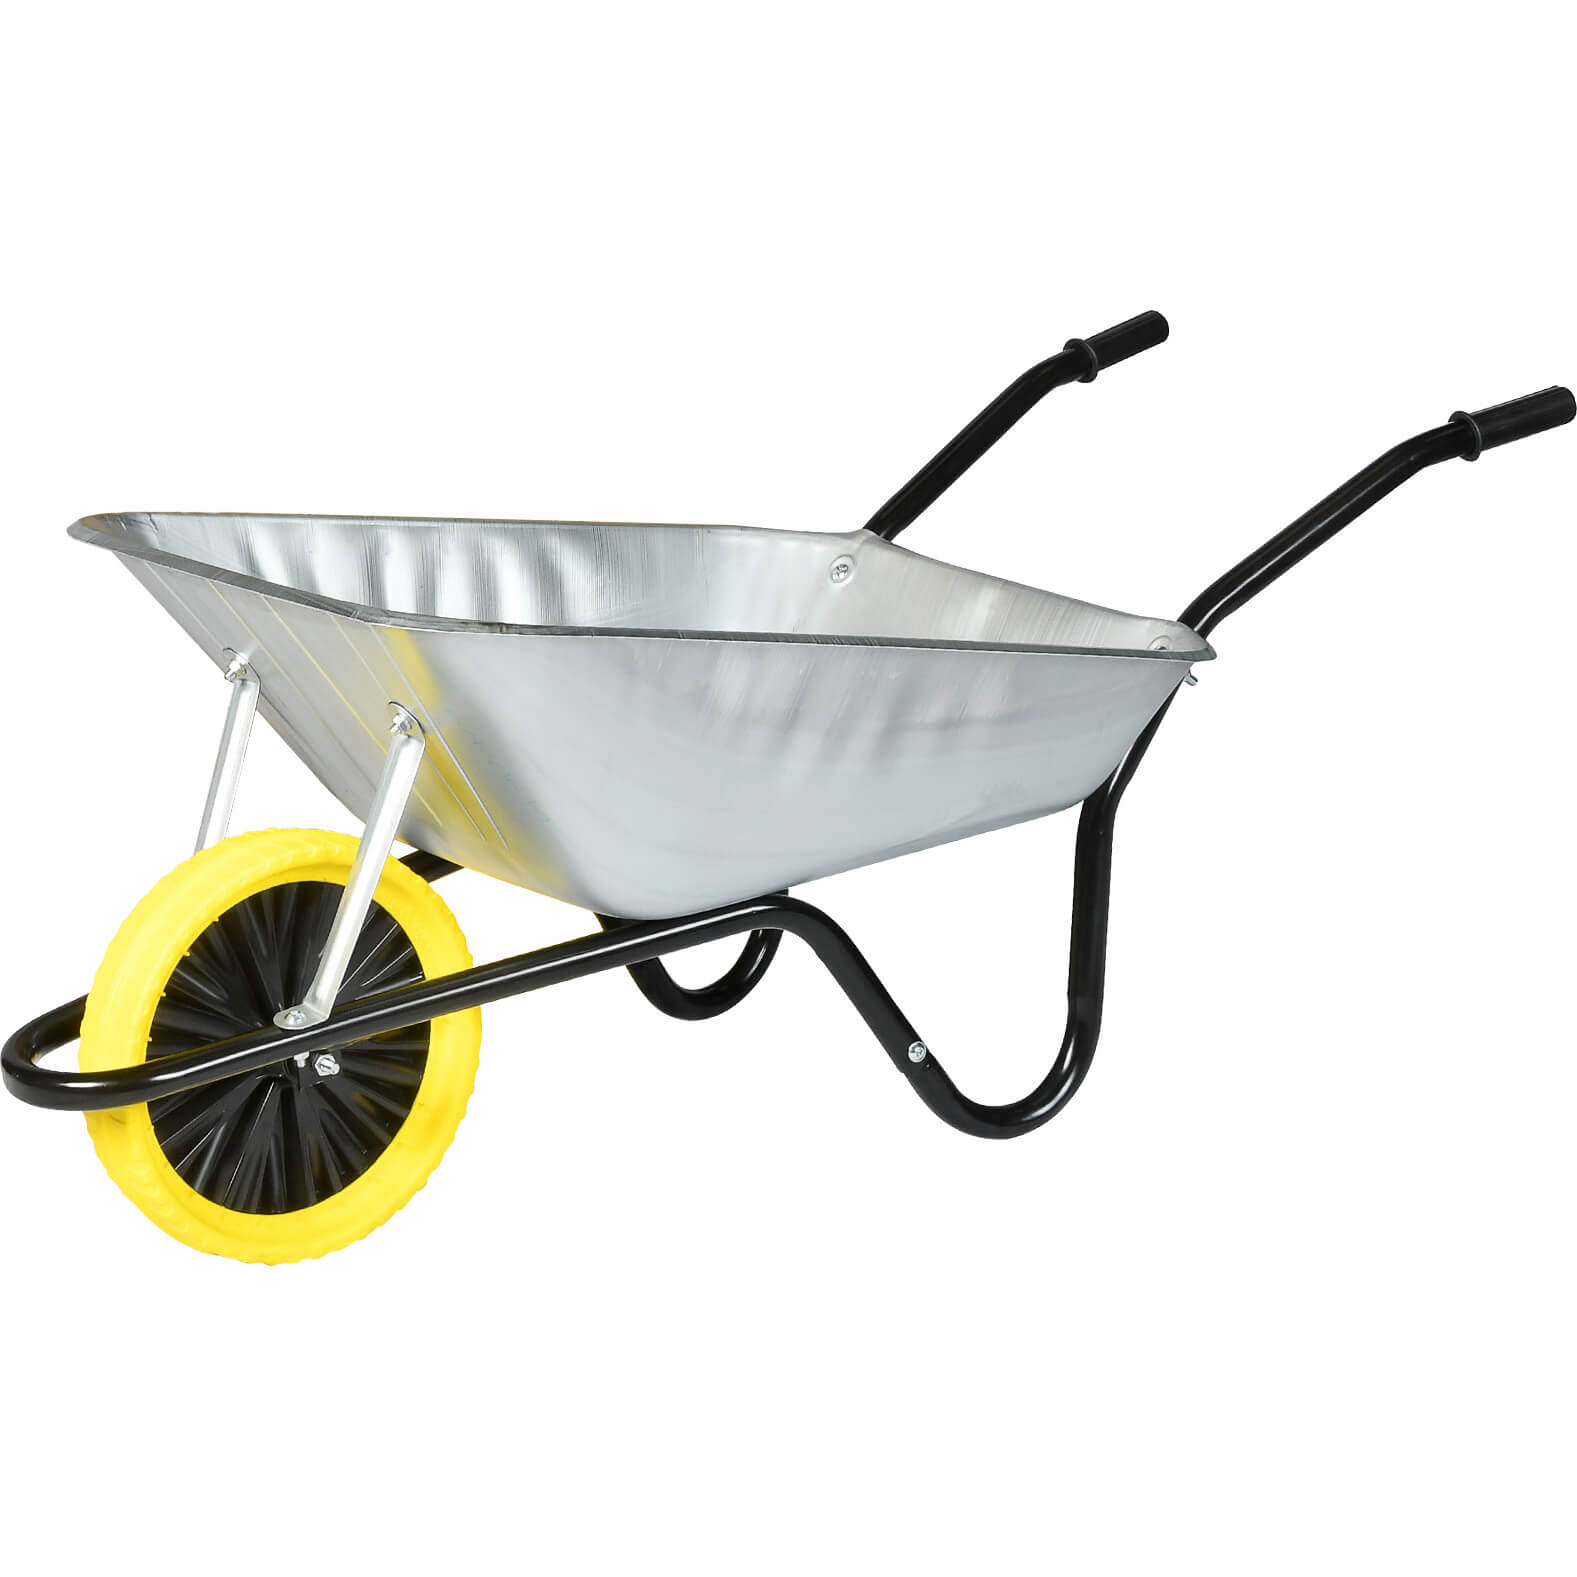 Image of Walsall The Easiload Builders Puncture Proof Wheelbarrow 85l Galvanized Steel